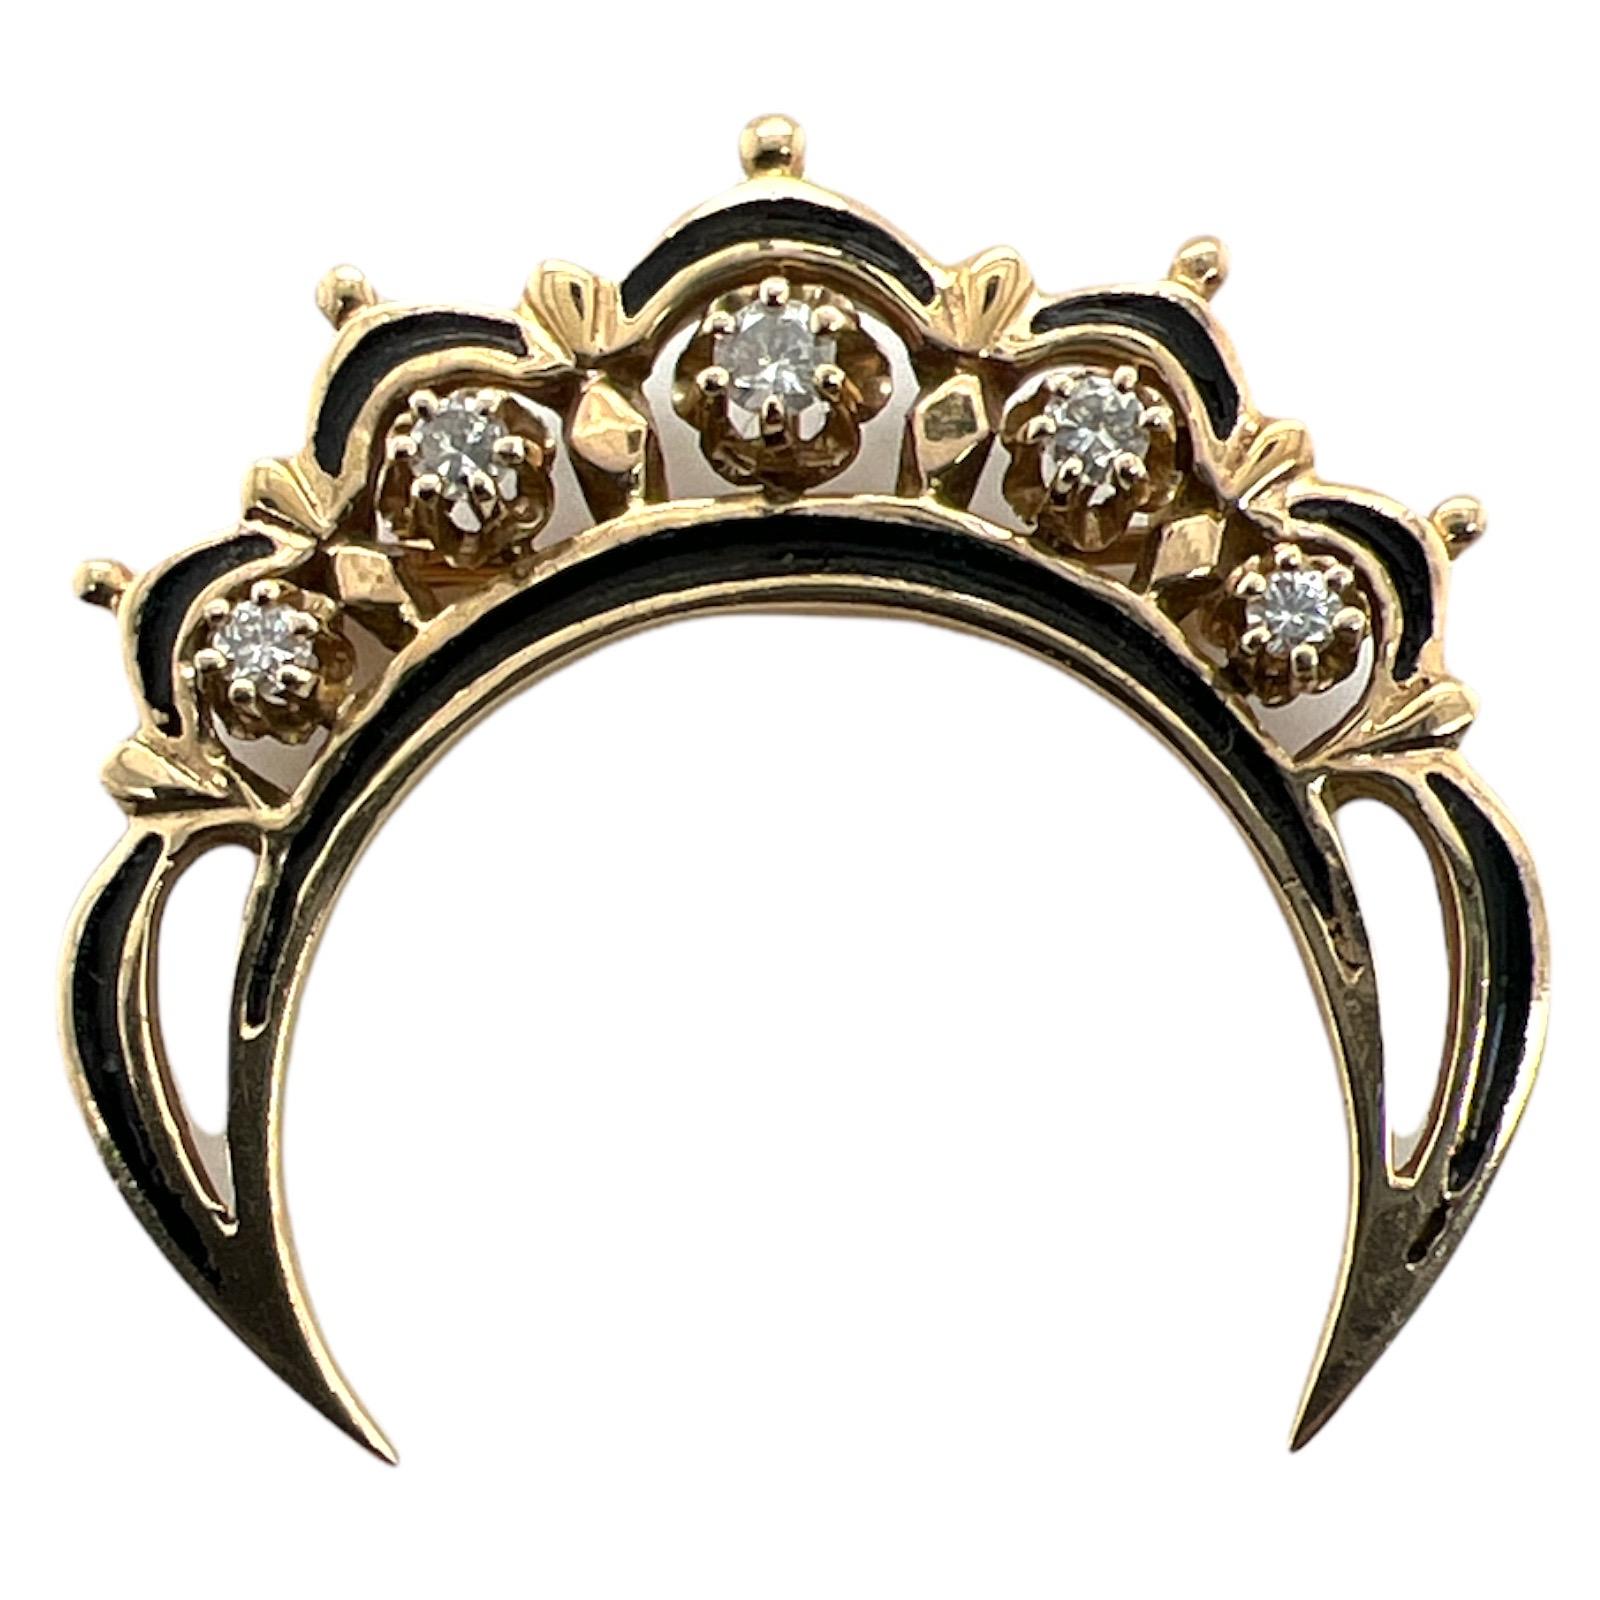 Diamond and black enamel vintage crescent can be worn as a pendant or brooch. The pendant features 5 diamonds weighing approximately .23 carat total weight and graded H-I color and SI clarity. The crescent is handcrafted in 14 karat yellow gold and